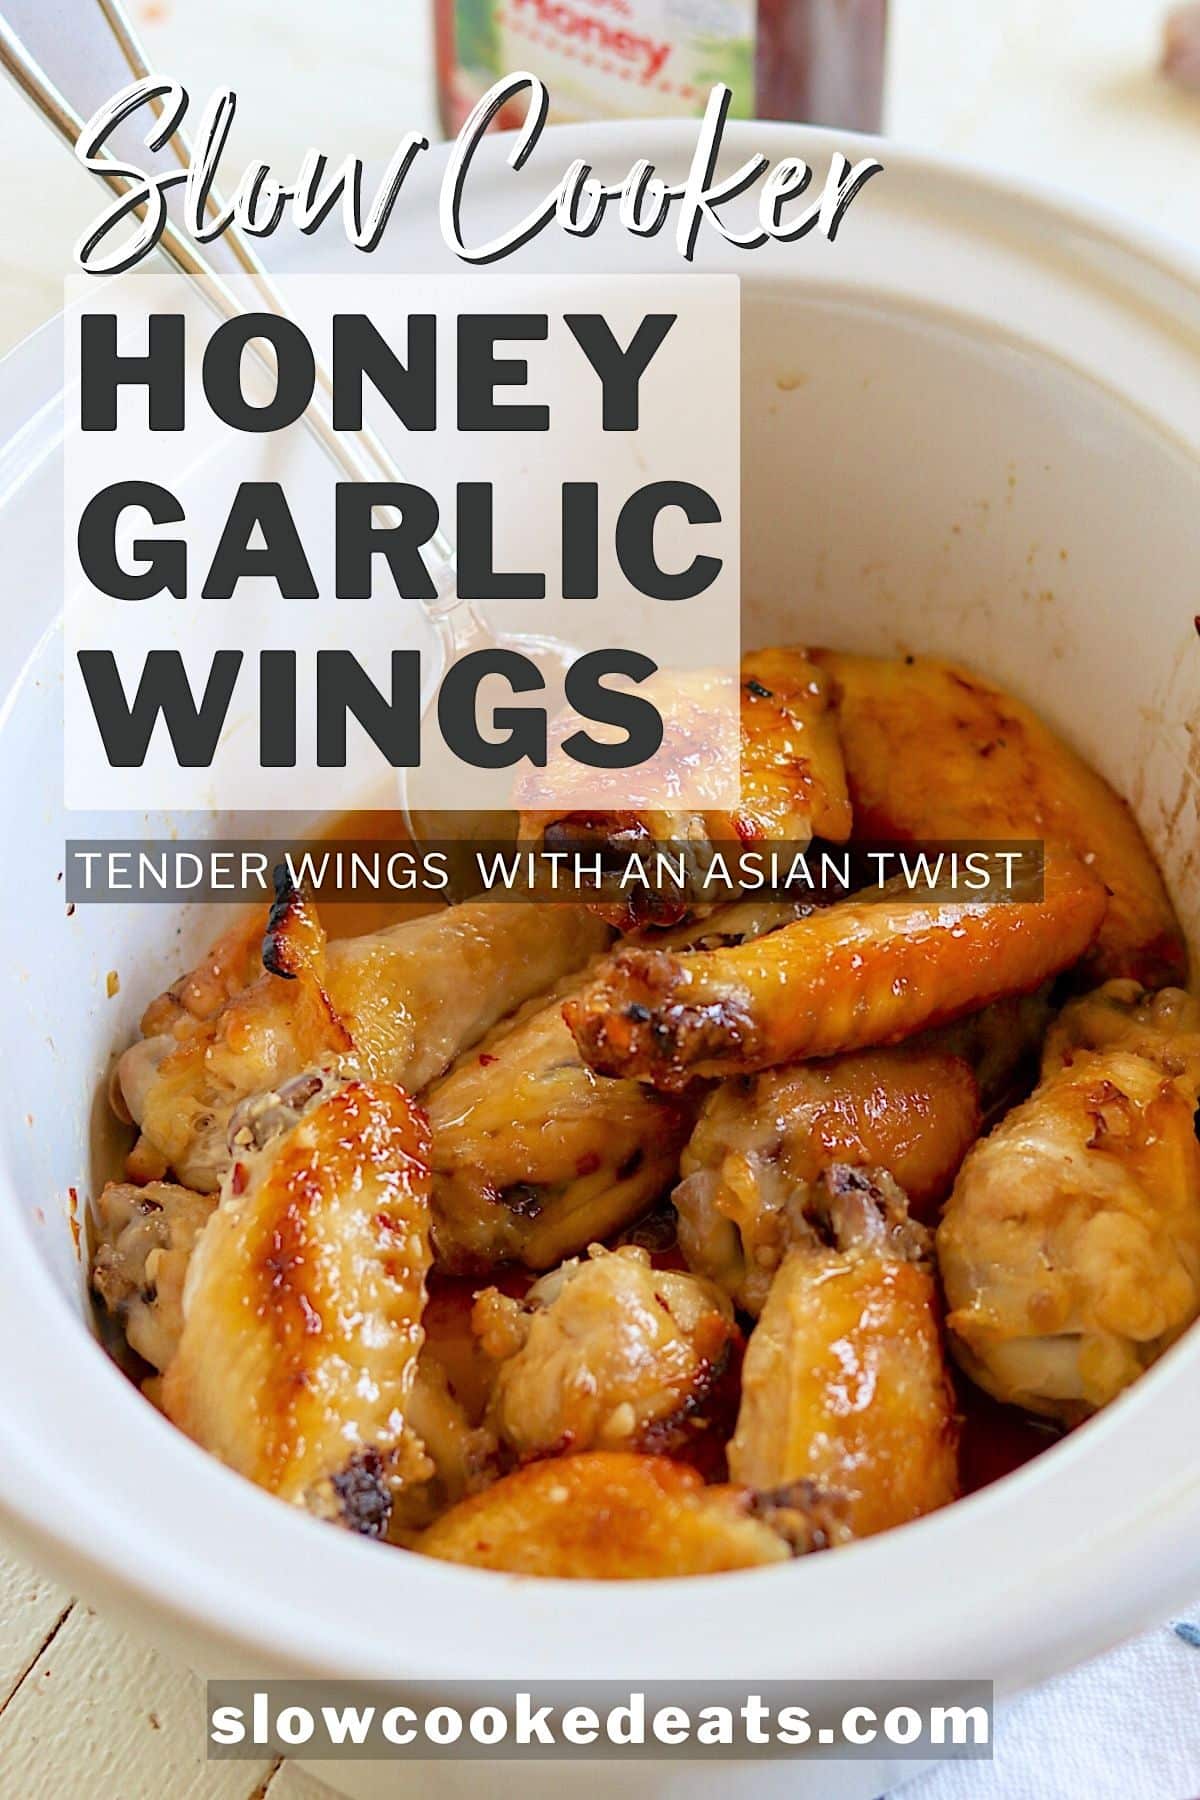 Pinterest pin with slow cooker honey garlic wings in a white oval crock pot.